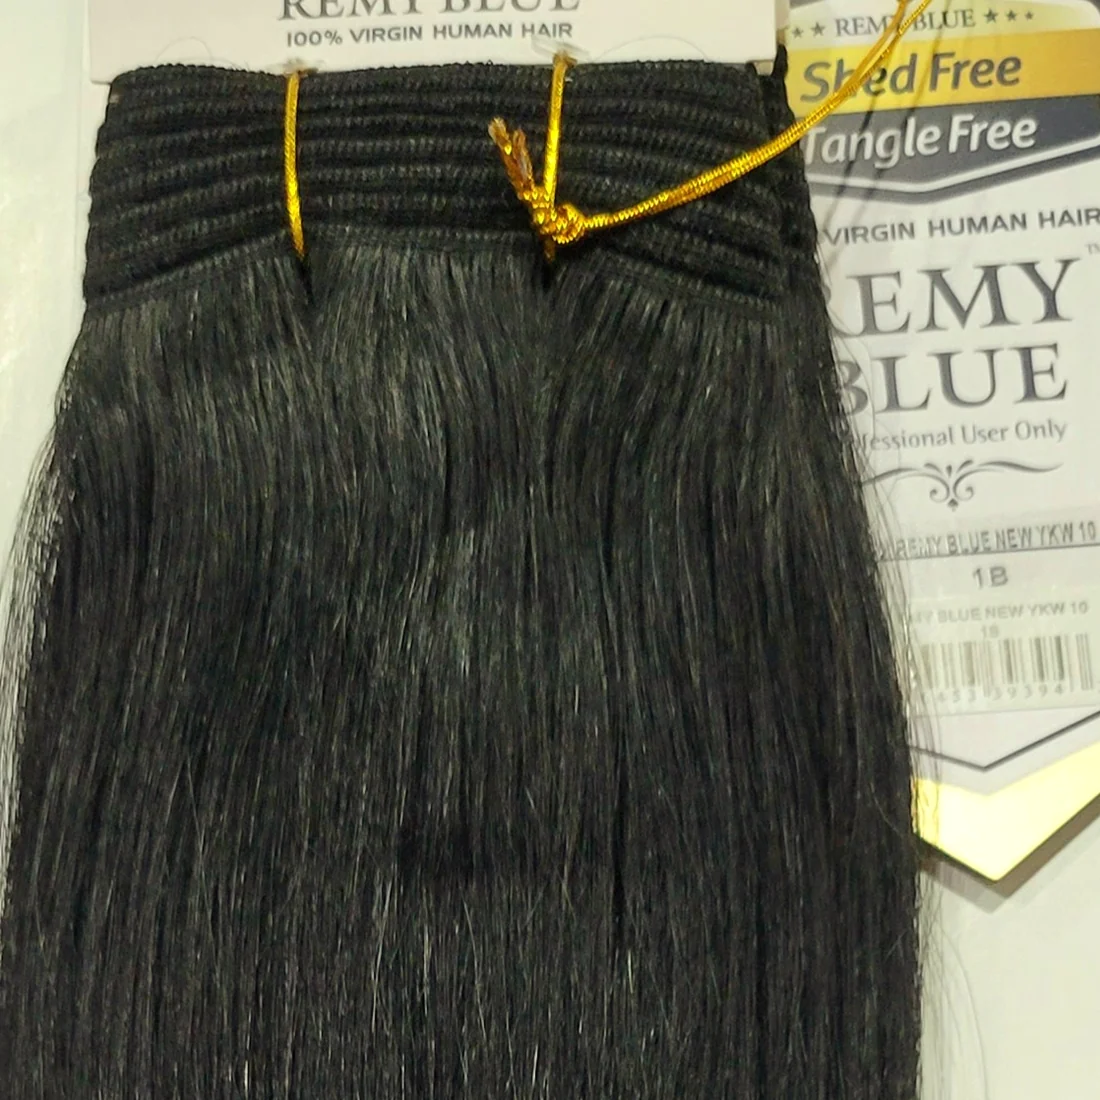 Remy Blue Human Hair New Yaky 24"